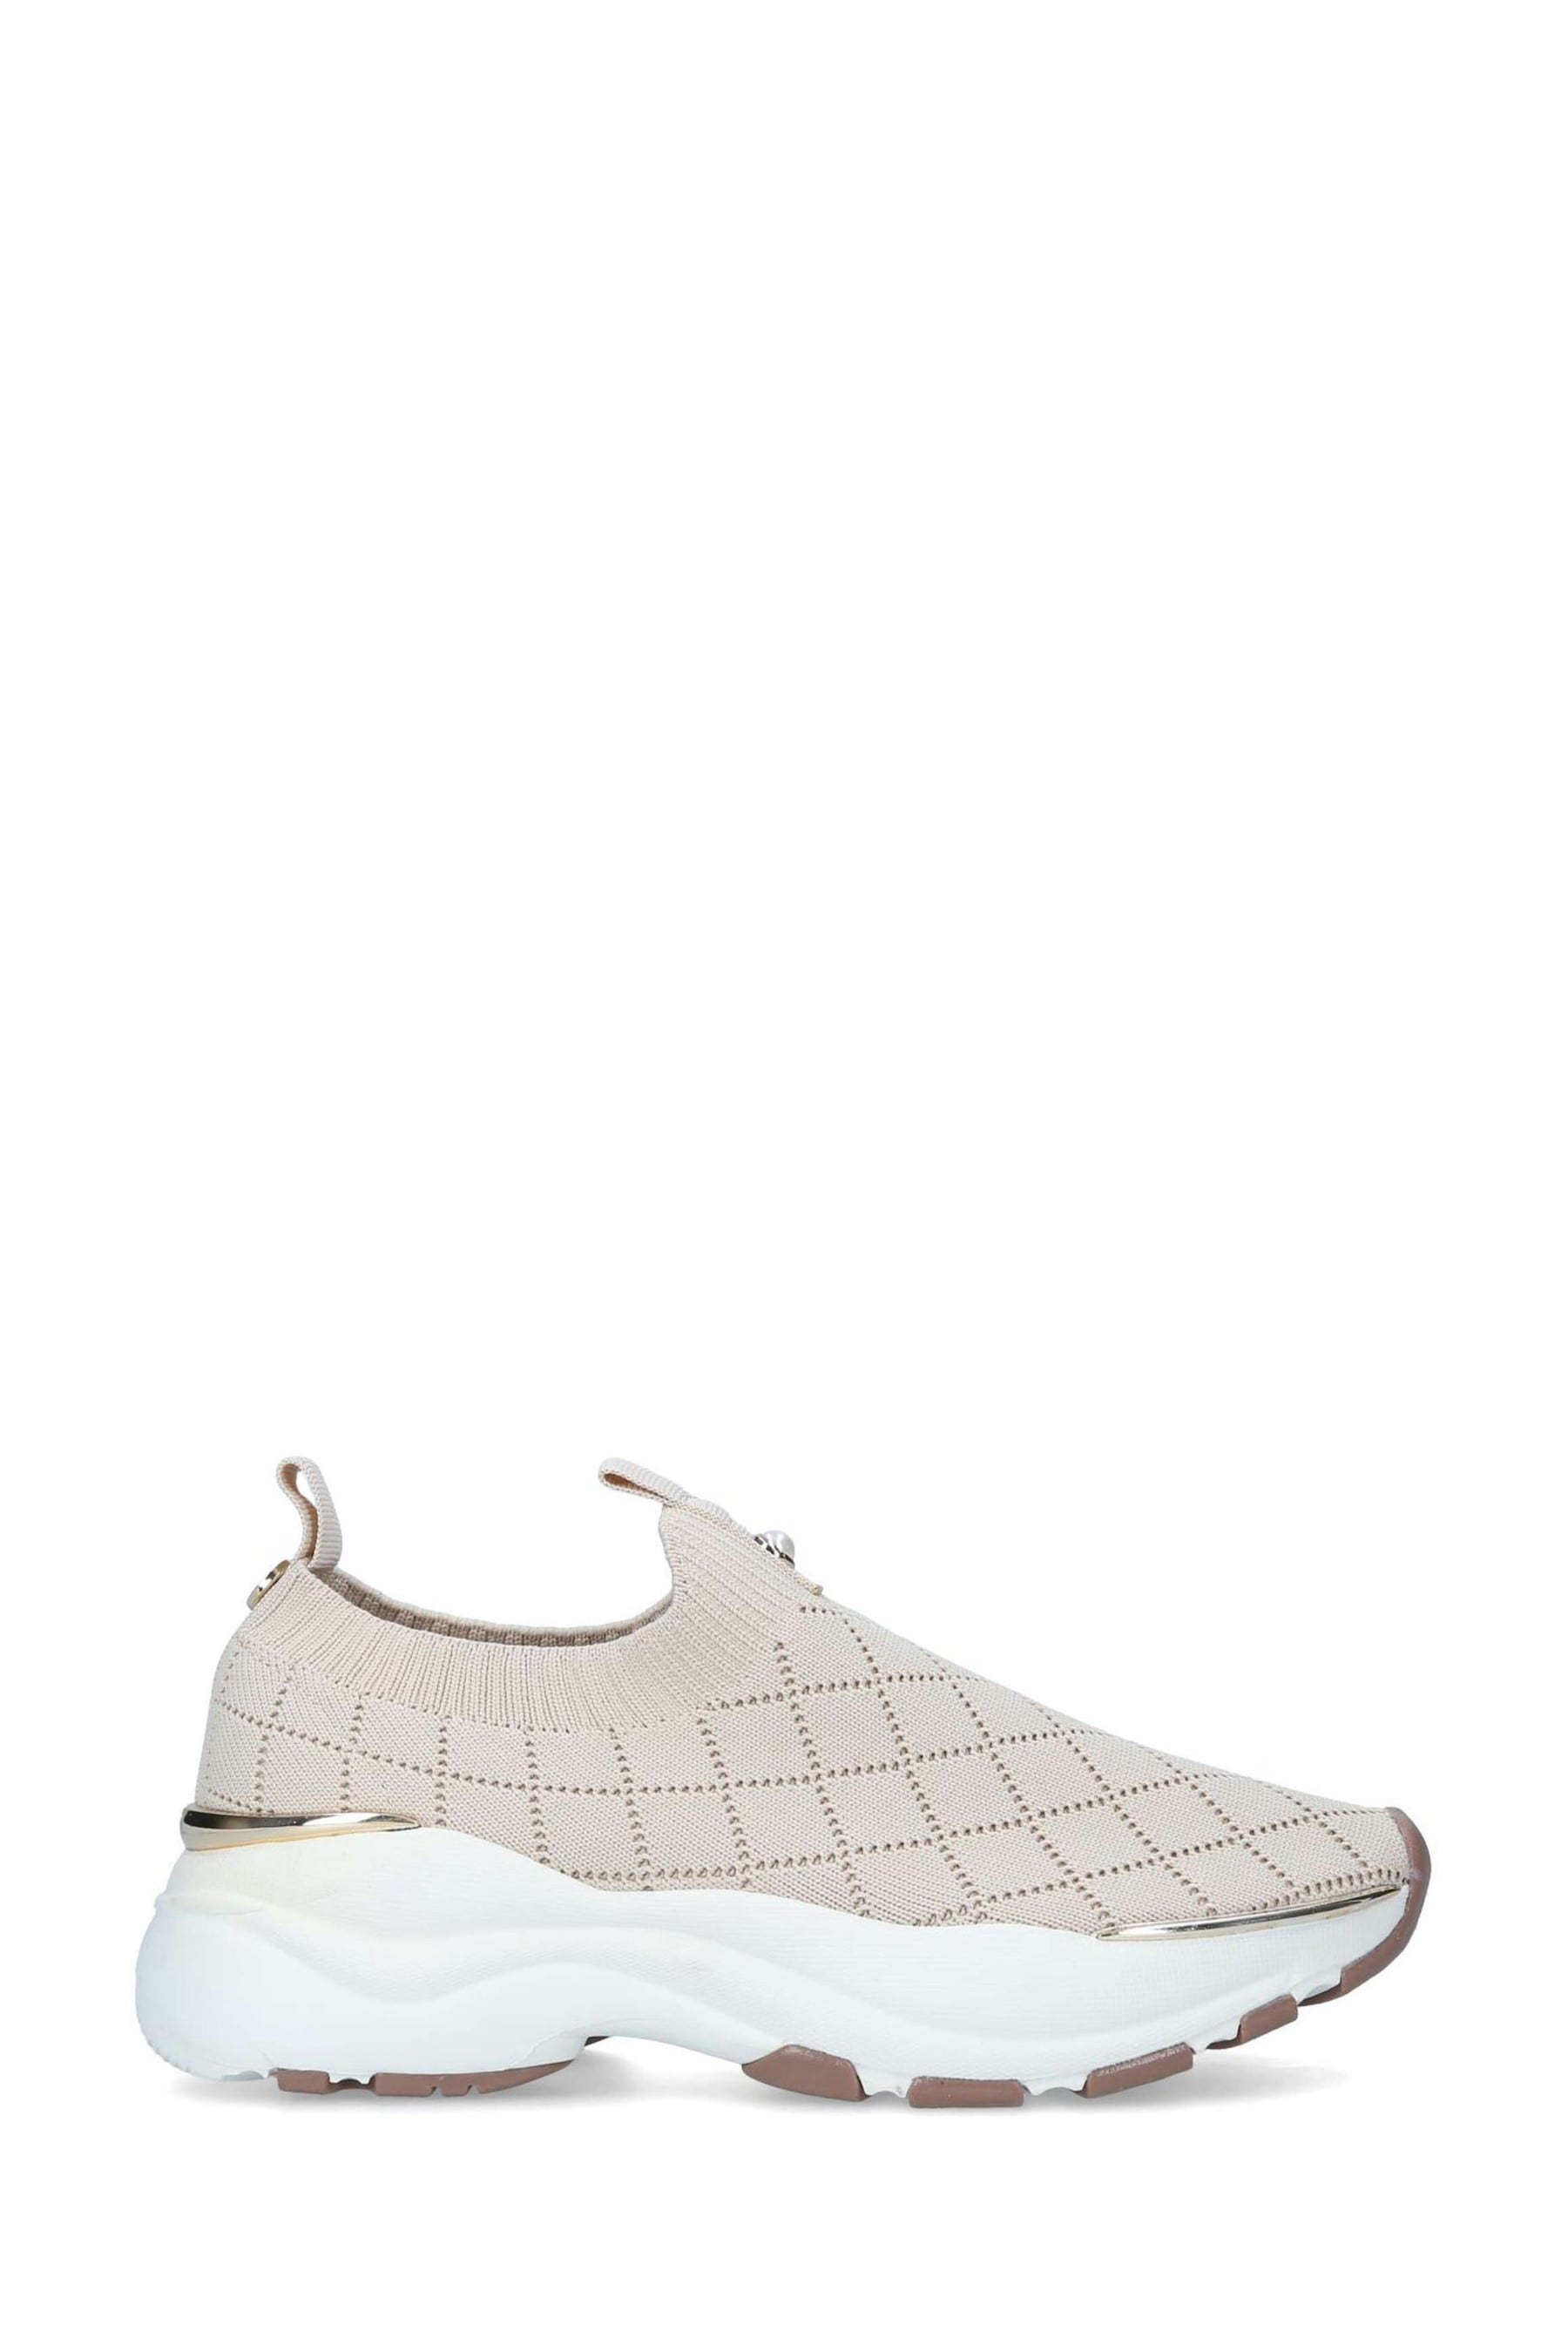 Buy Miss KG Nude Klara Knit Trainers from the Next UK 